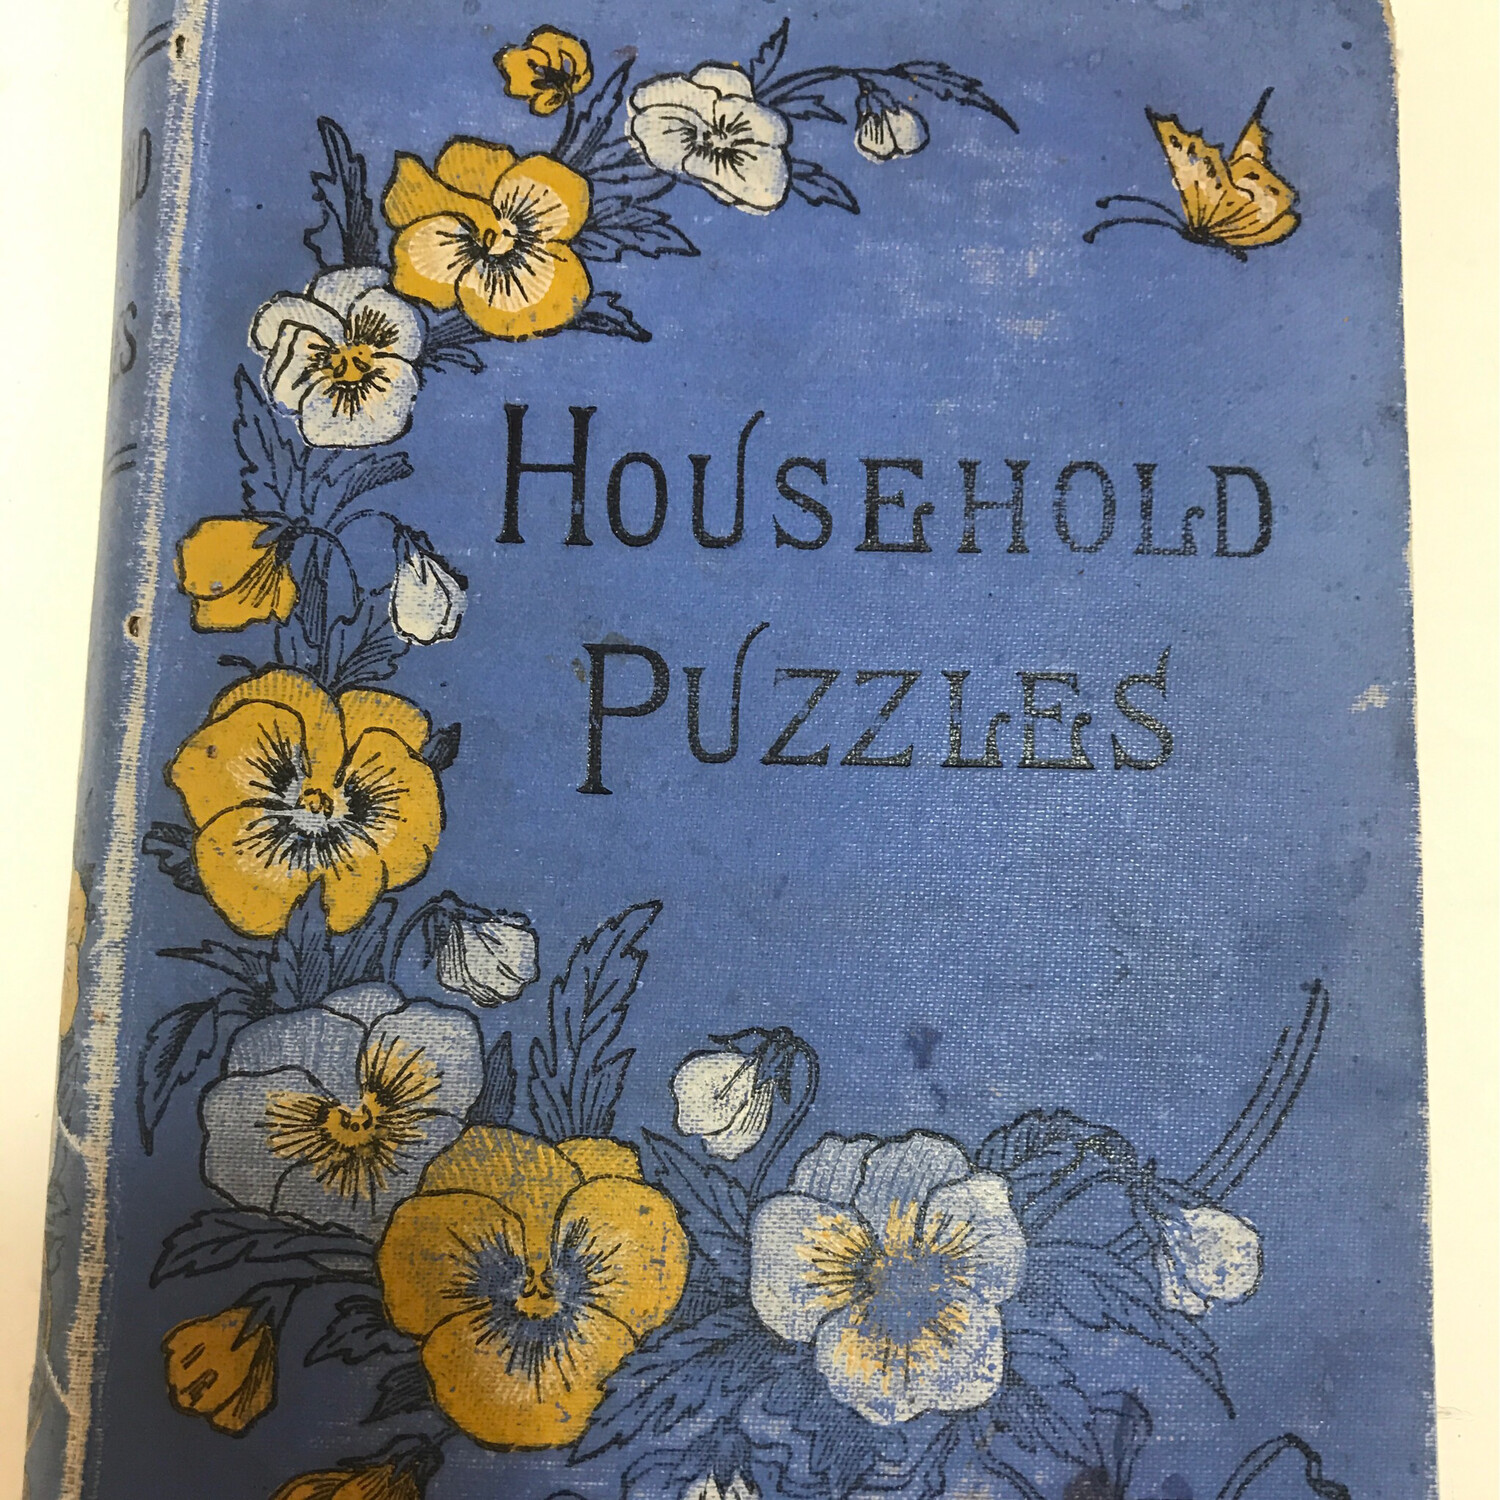 Household Puzzles, Pansy